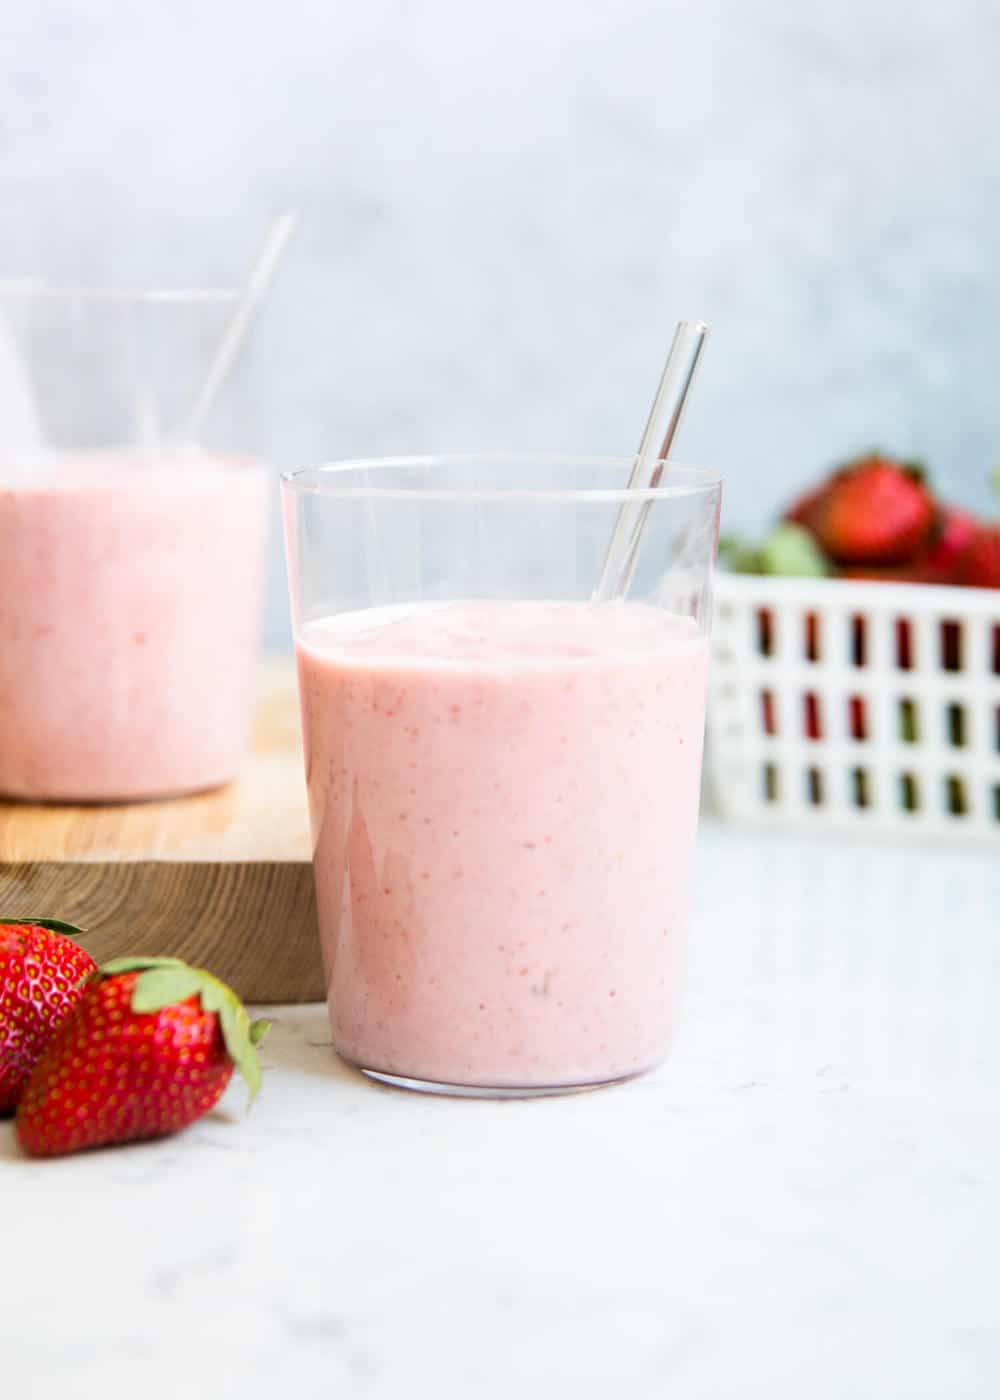 Strawberry banana smoothie in a glass with a straw.